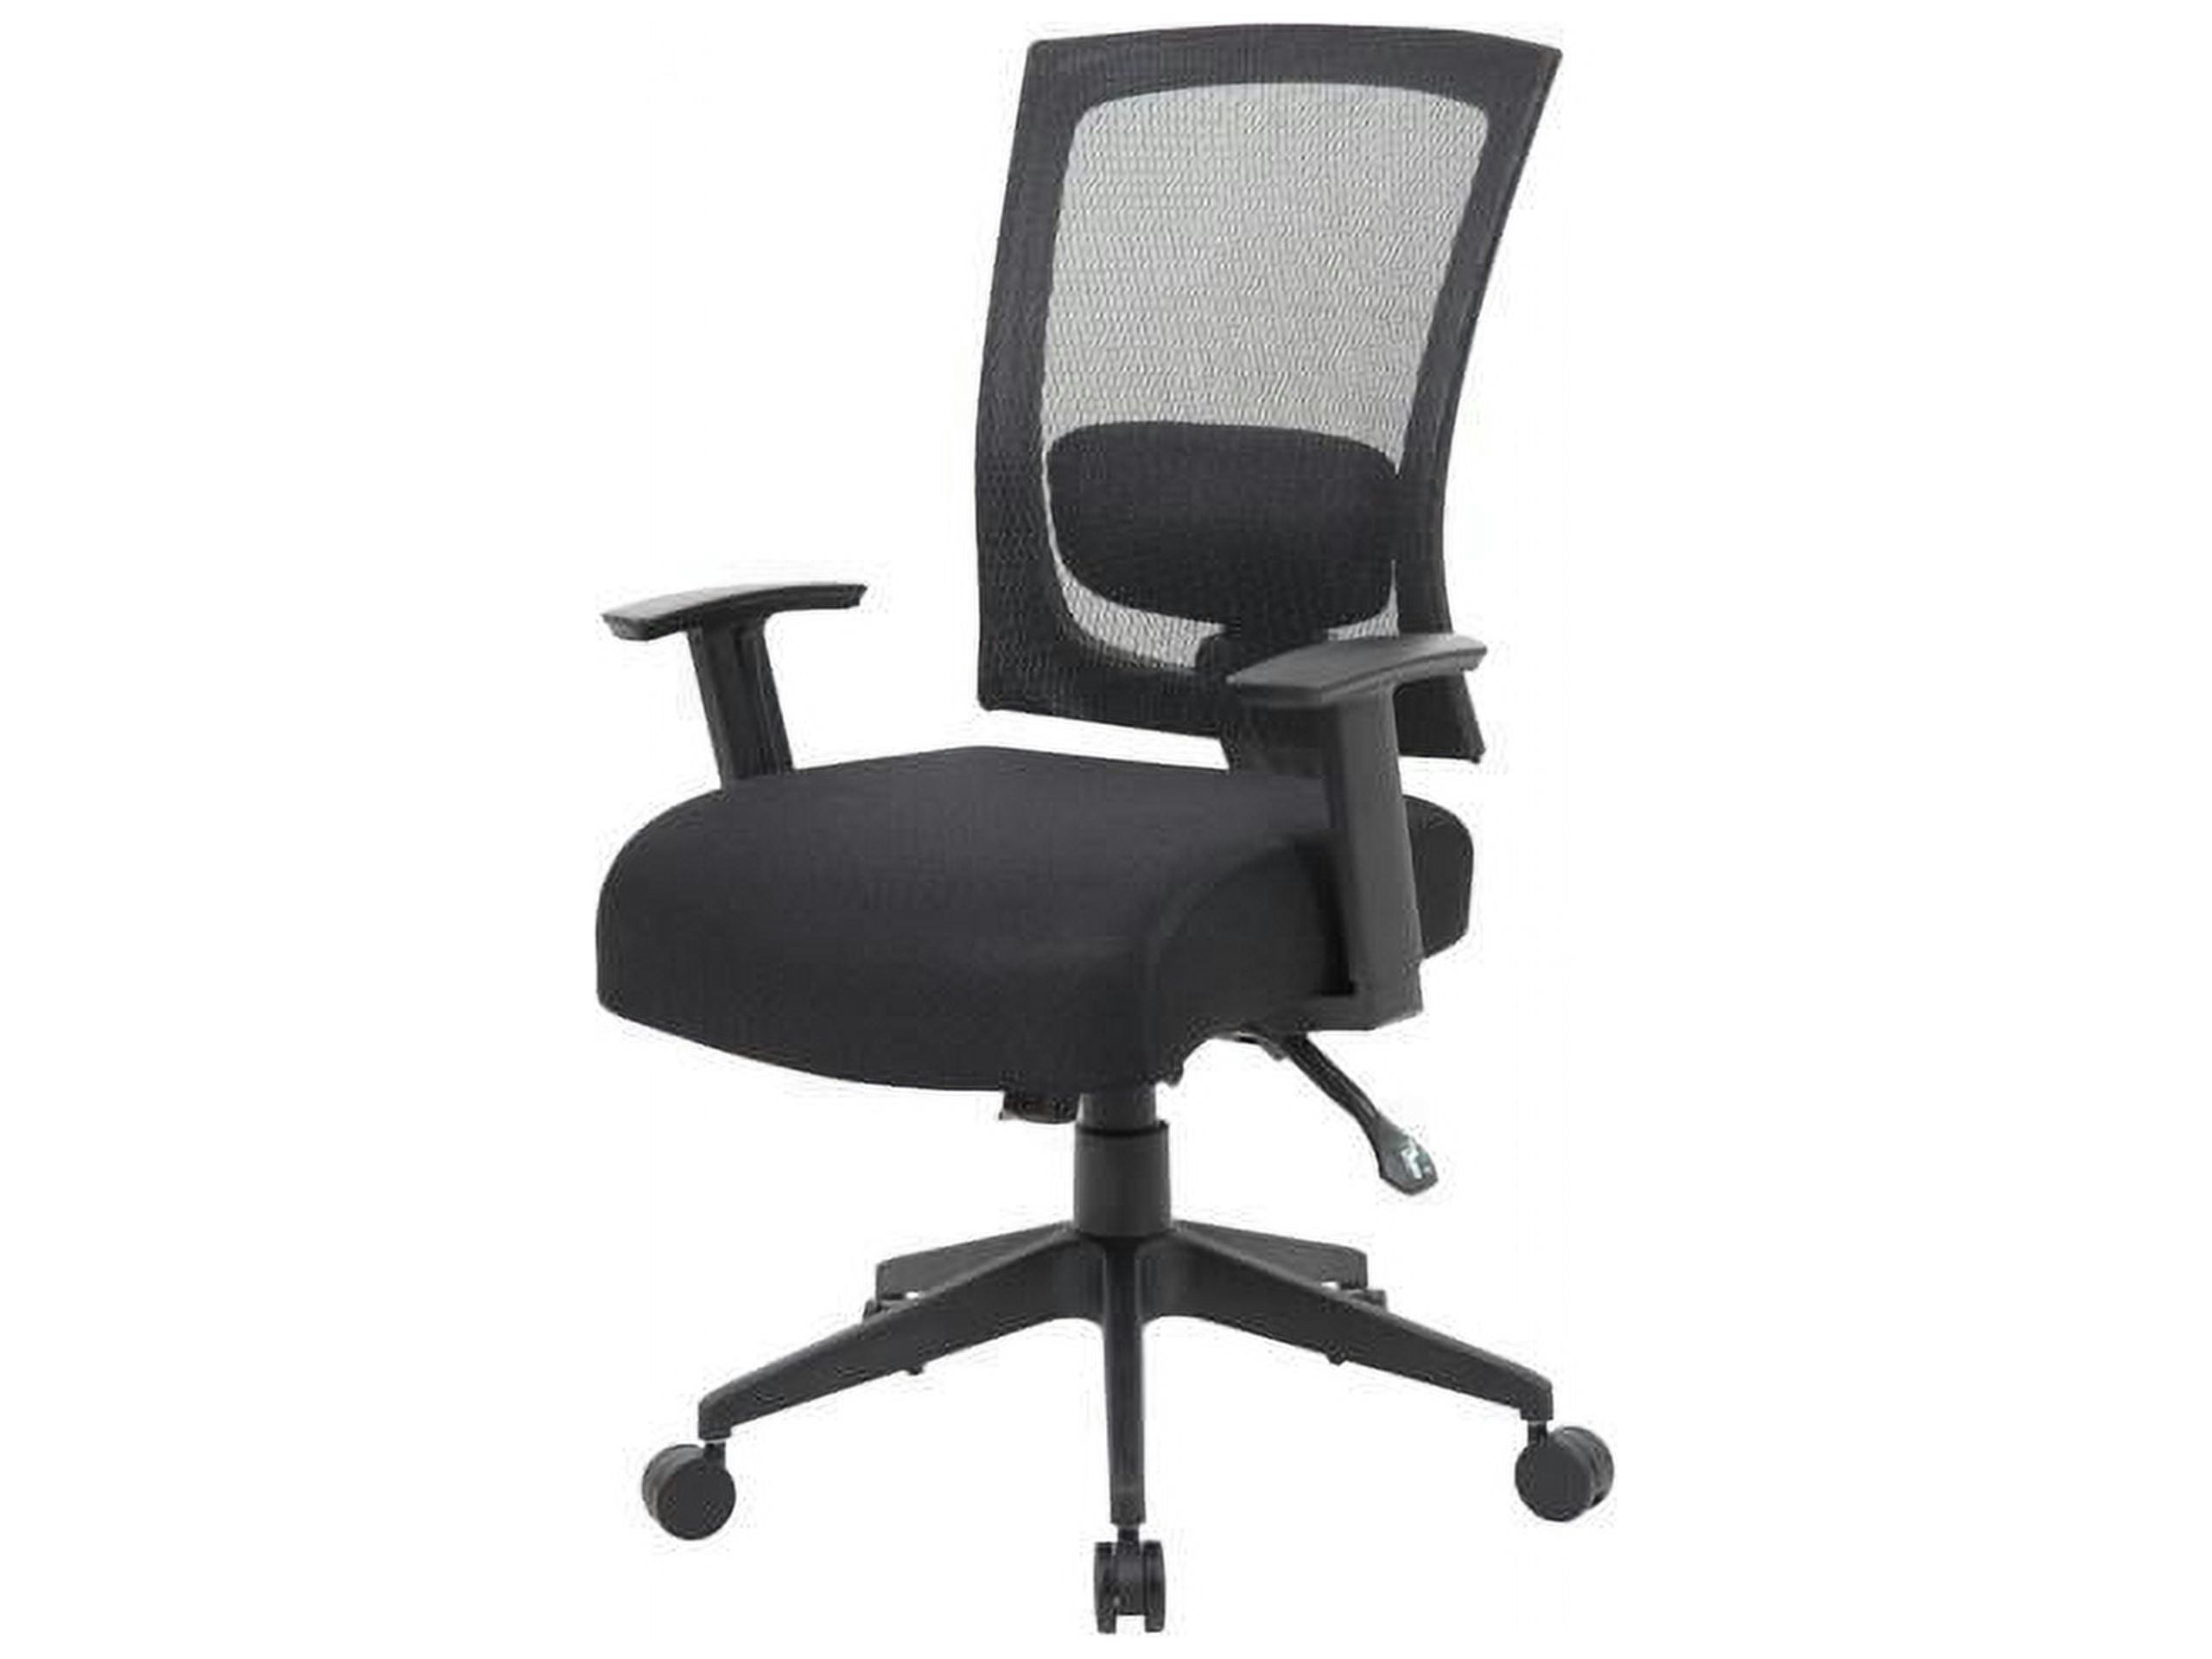 Adjustable Mesh Task Chair with Lumbar Support, Black